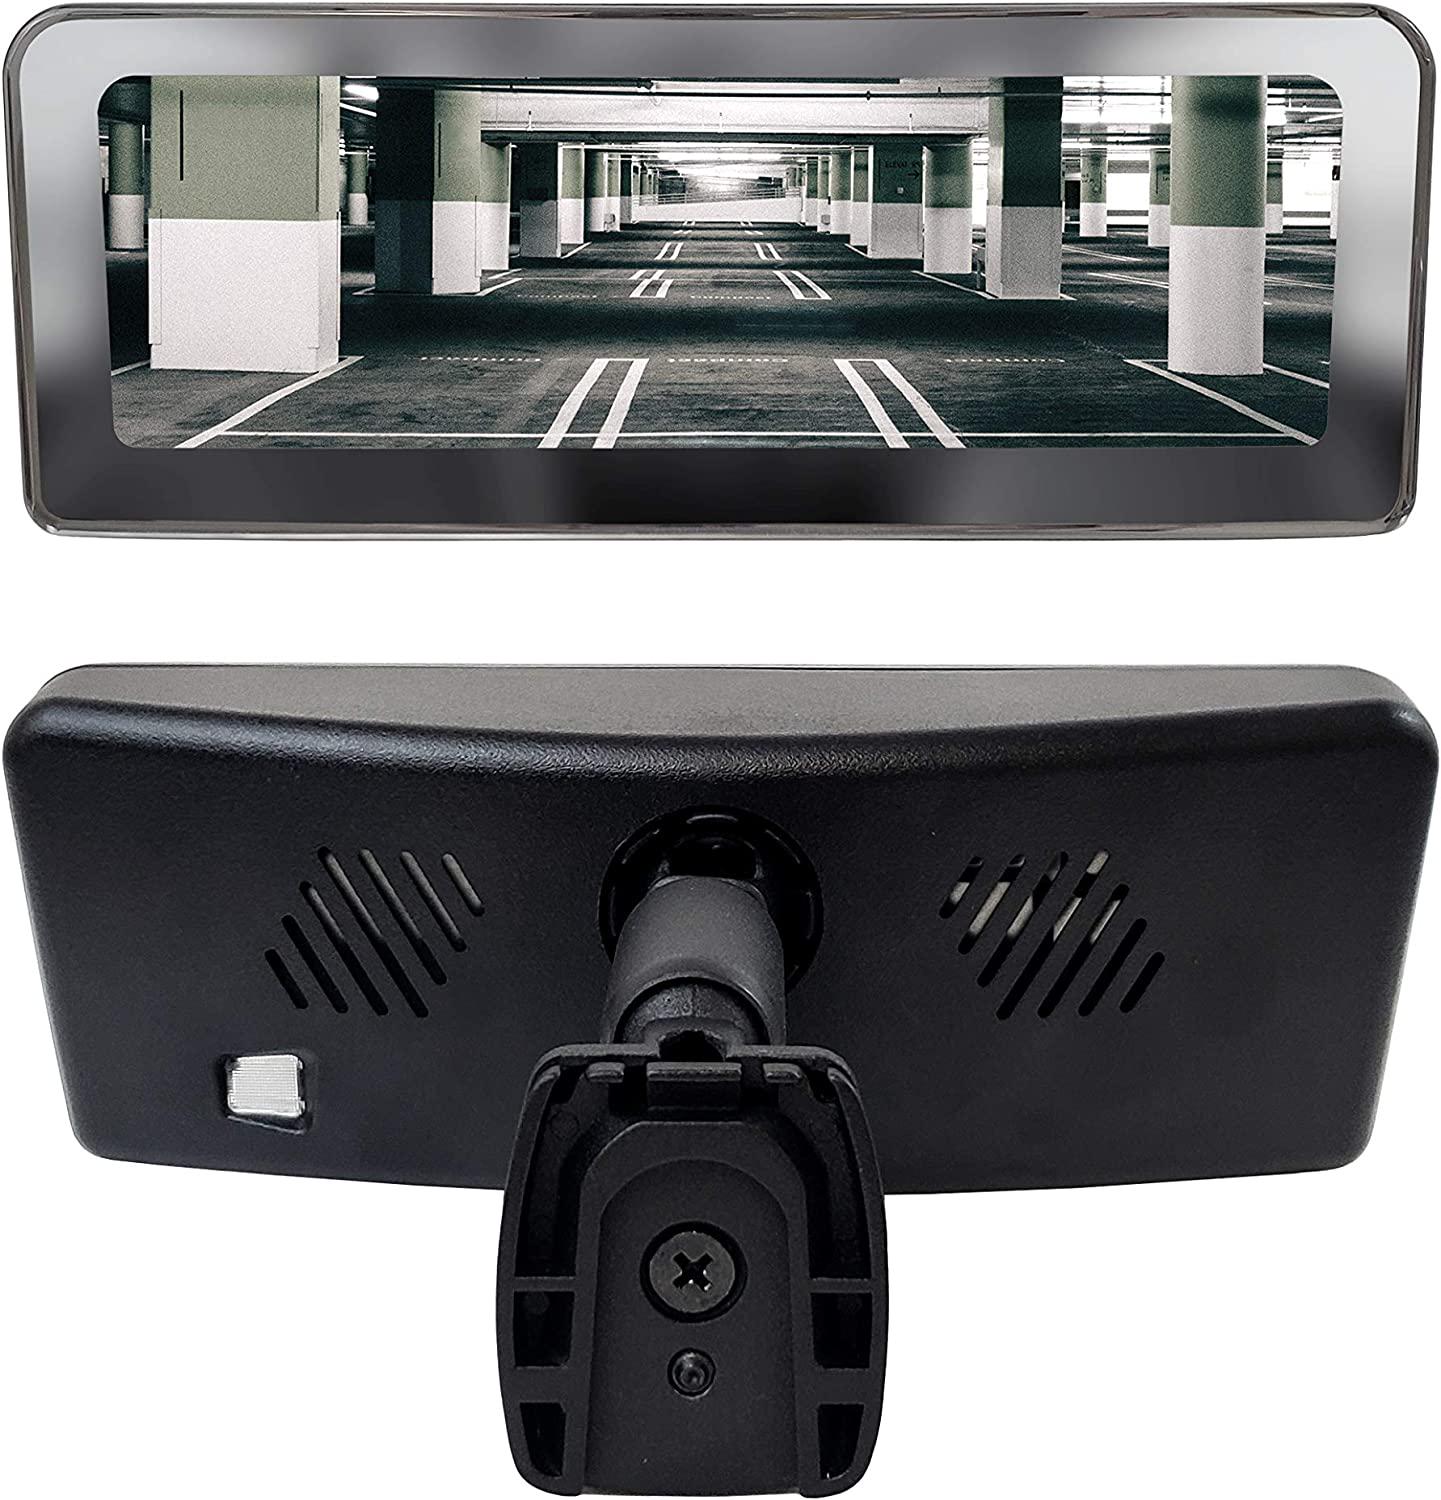 Master Tailgaters, Master Tailgaters Frameless Rear View Mirror with 7 LCD Display and 4 Video Inputs - For Multi Backup Camera Setups